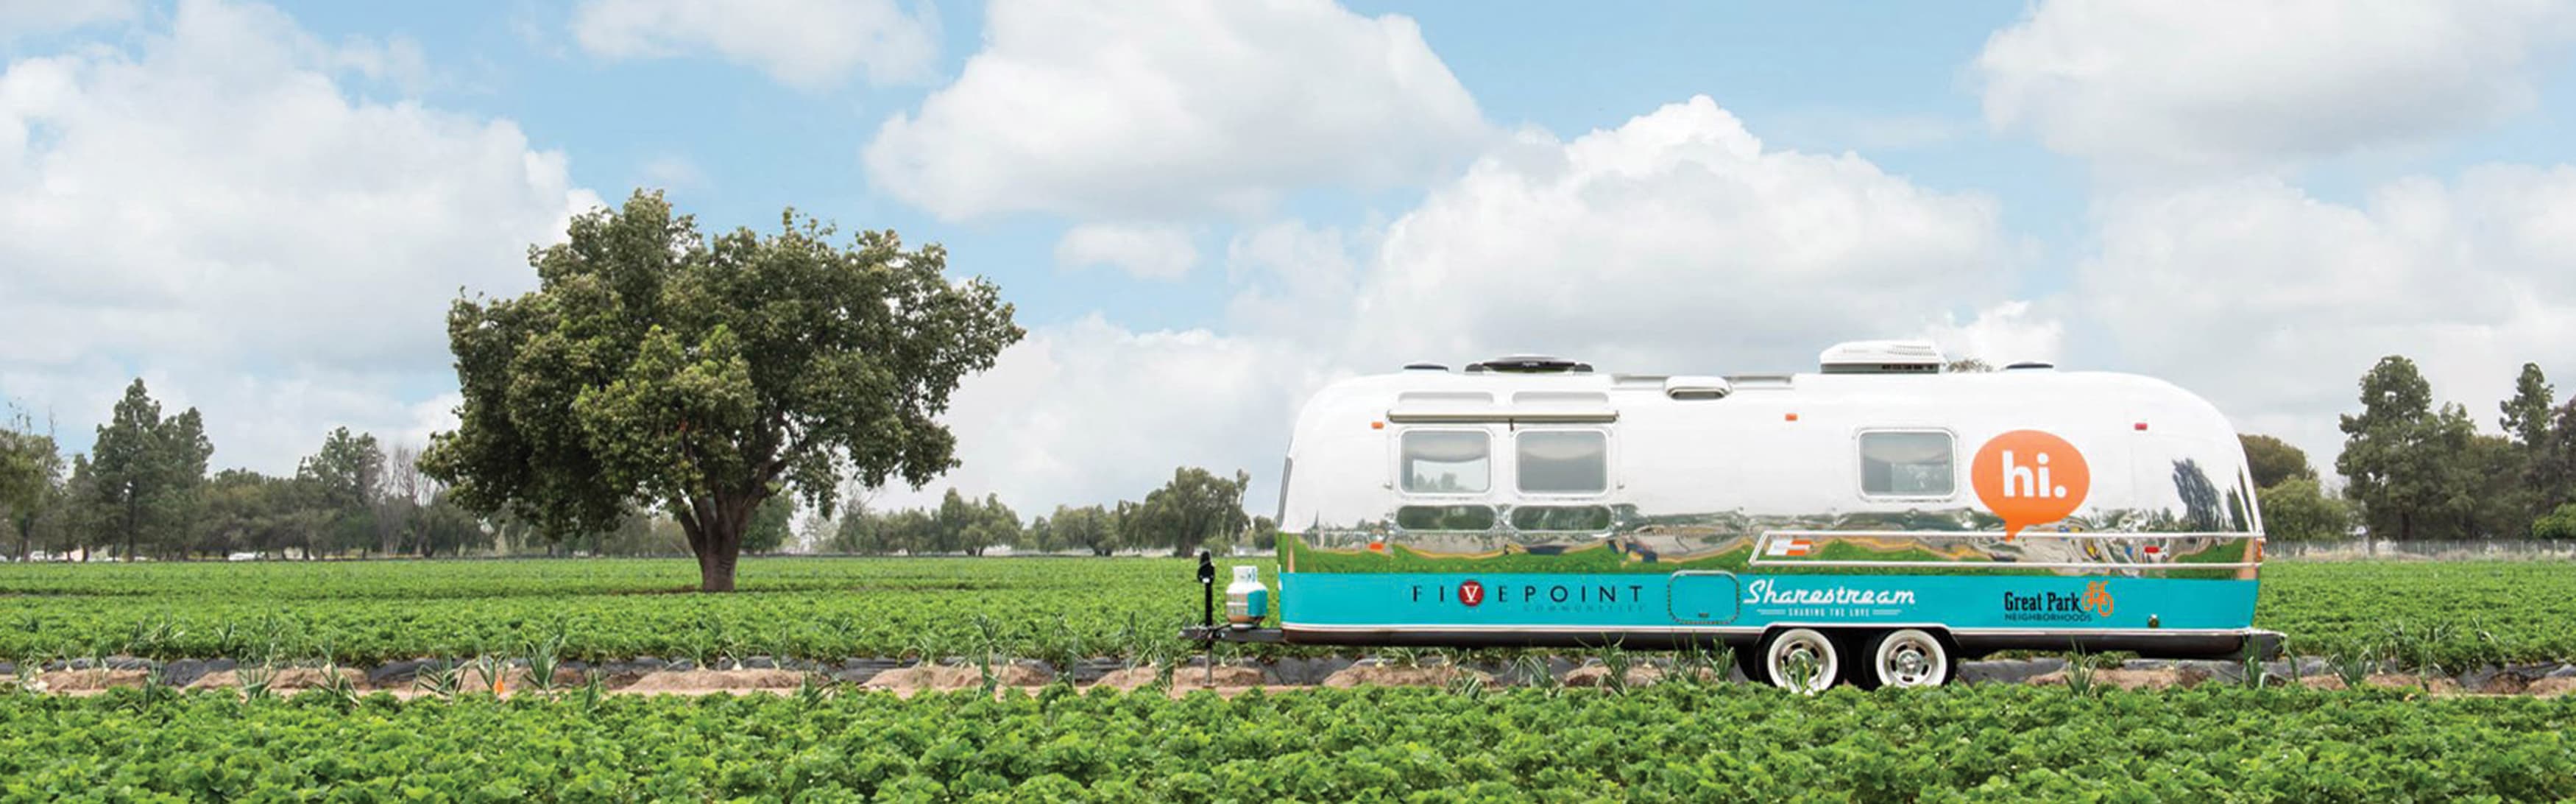 An airstream trailer with friendly, bold graphics for RSM and Fivepoint's Great Park Neighborhoods project.